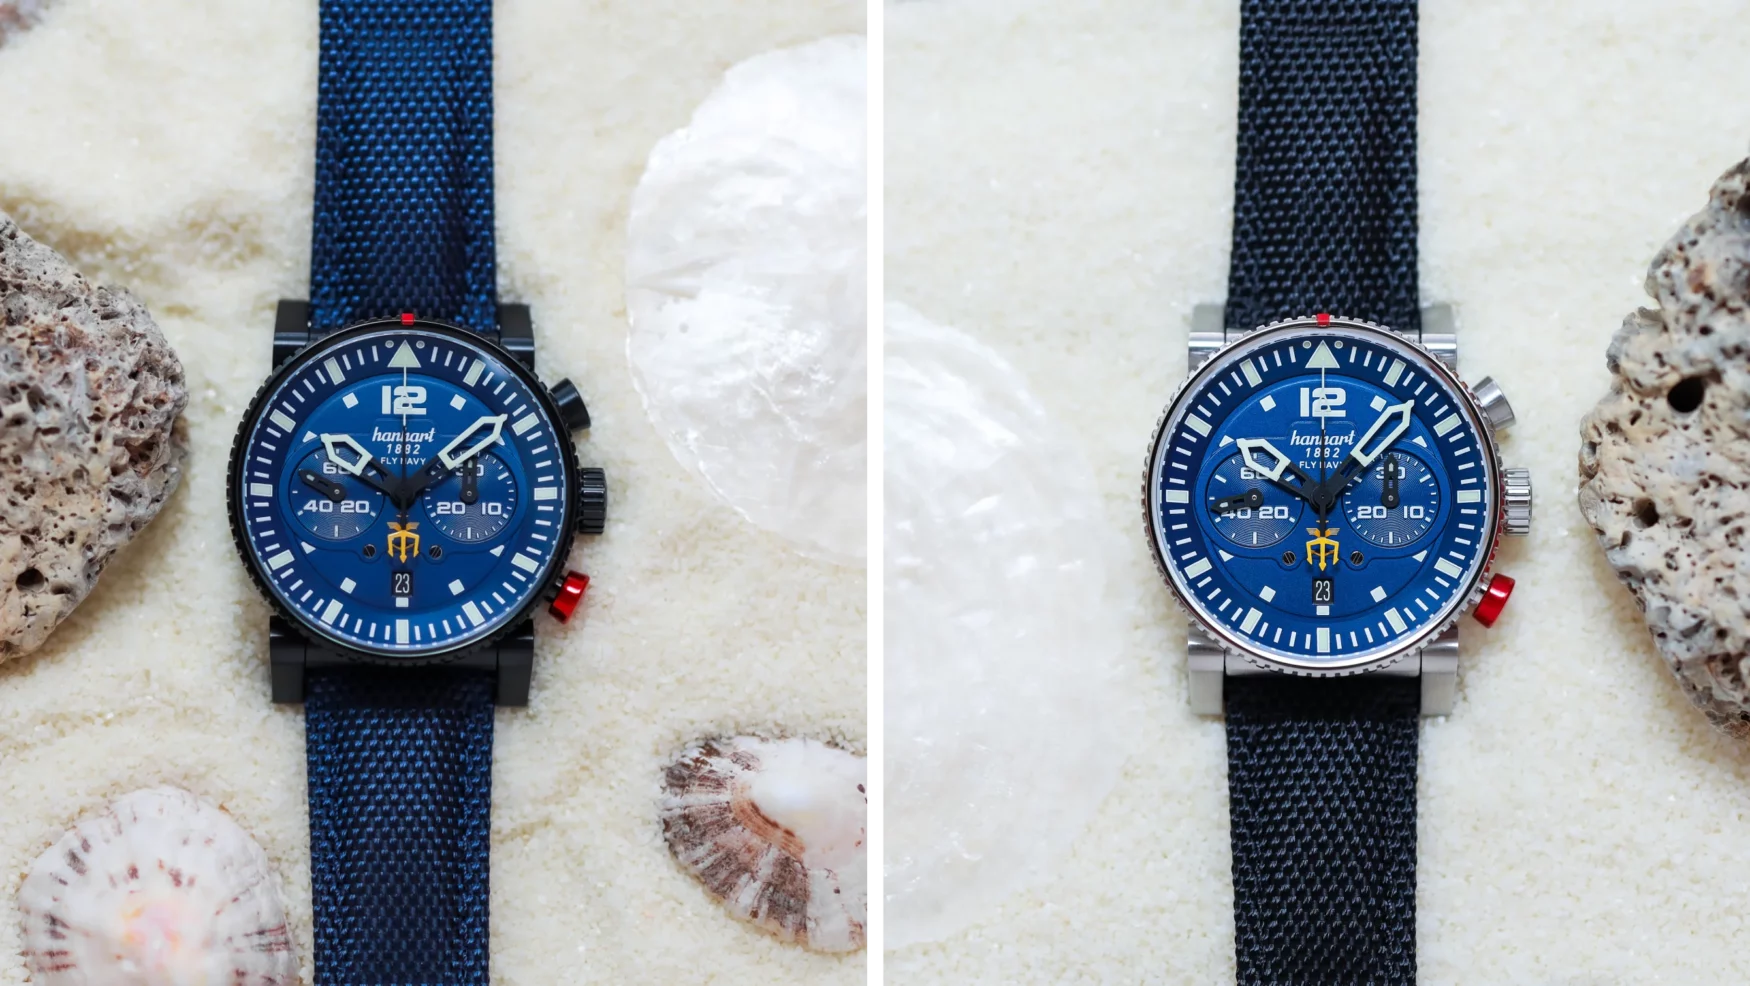 The Hanhart Primus Fly Navy brings back articulating lugs and imposing dimensions